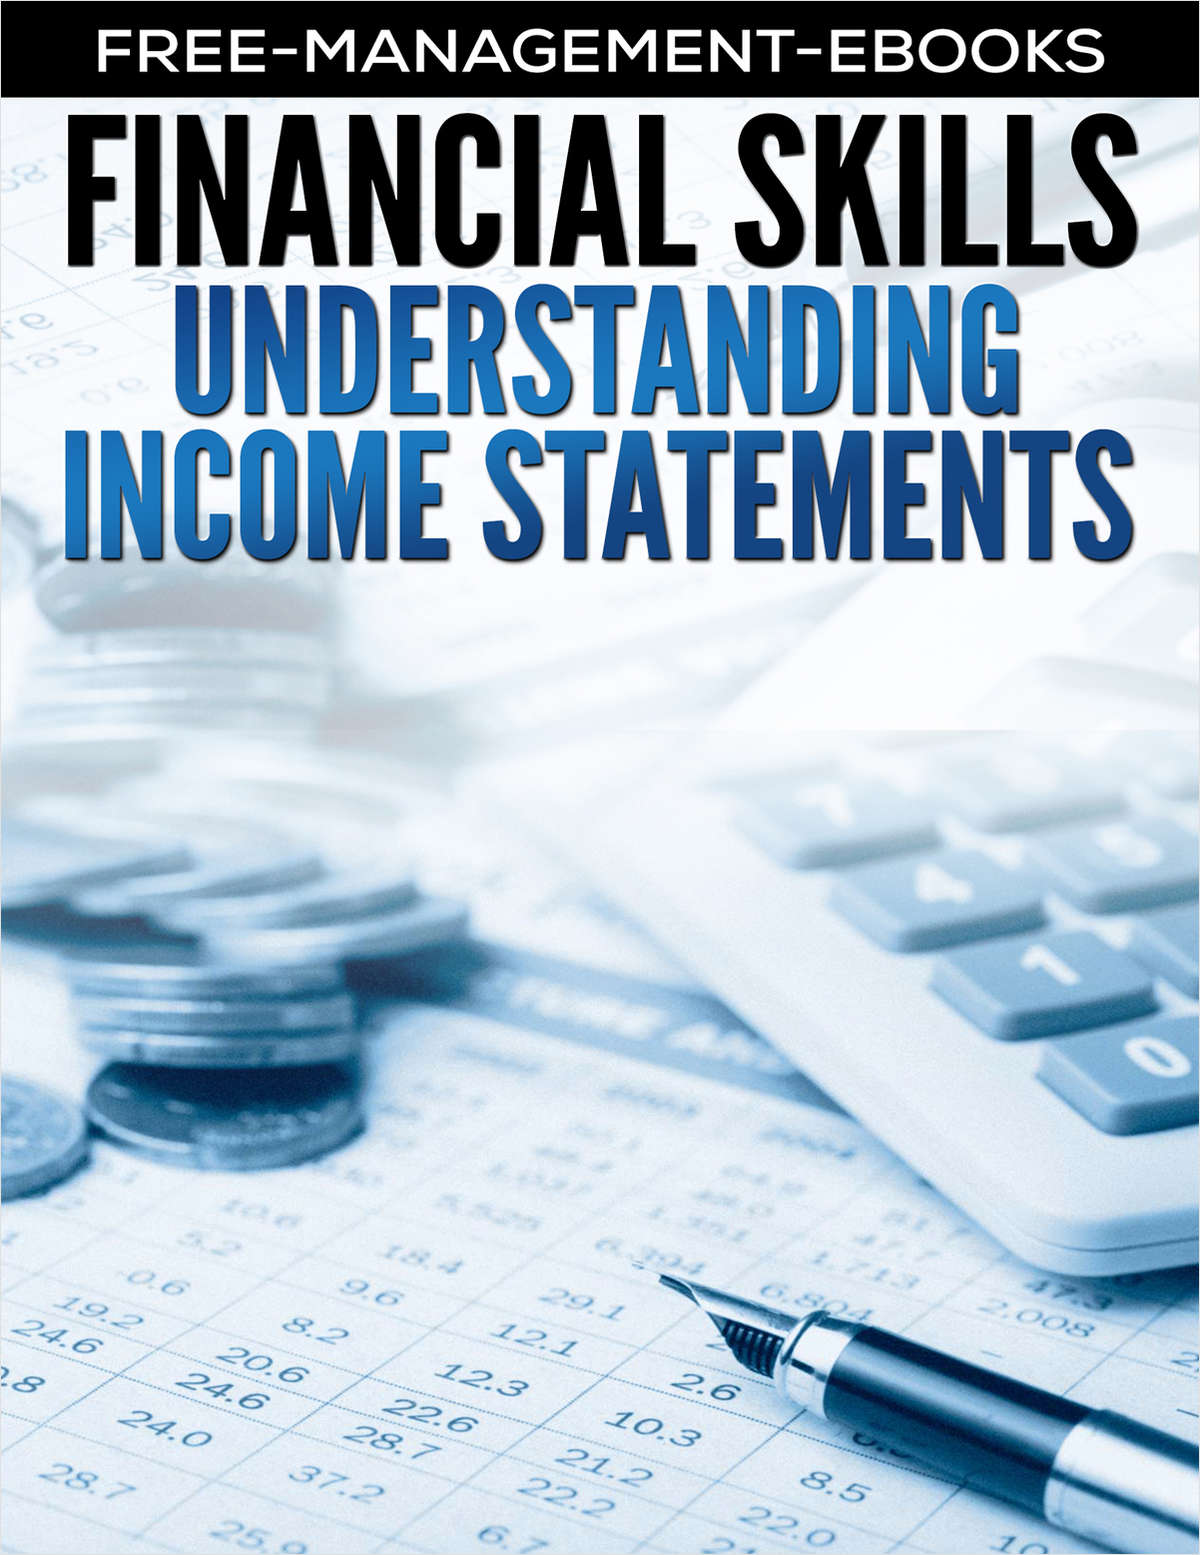 Income Statements -- Developing Your Finance Skills